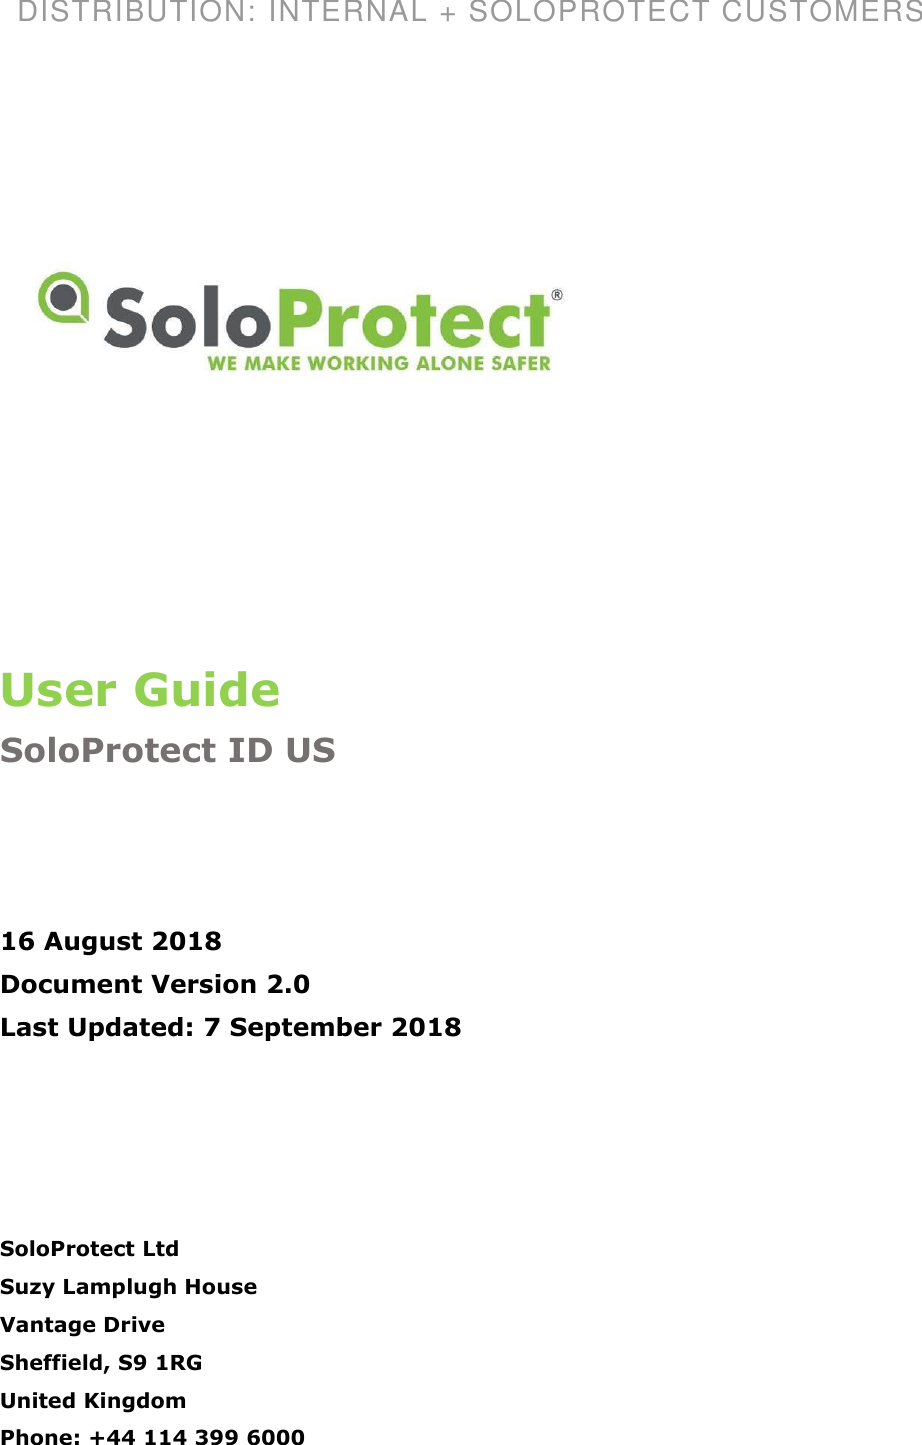 DISTRIBUTION: INTERNAL + SOLOPROTECT CUSTOMERS                User Guide SoloProtect ID US       16 August 2018 Document Version 2.0 Last Updated: 7 September 2018        SoloProtect Ltd Suzy Lamplugh House Vantage Drive Sheffield, S9 1RG United Kingdom Phone: +44 114 399 6000 